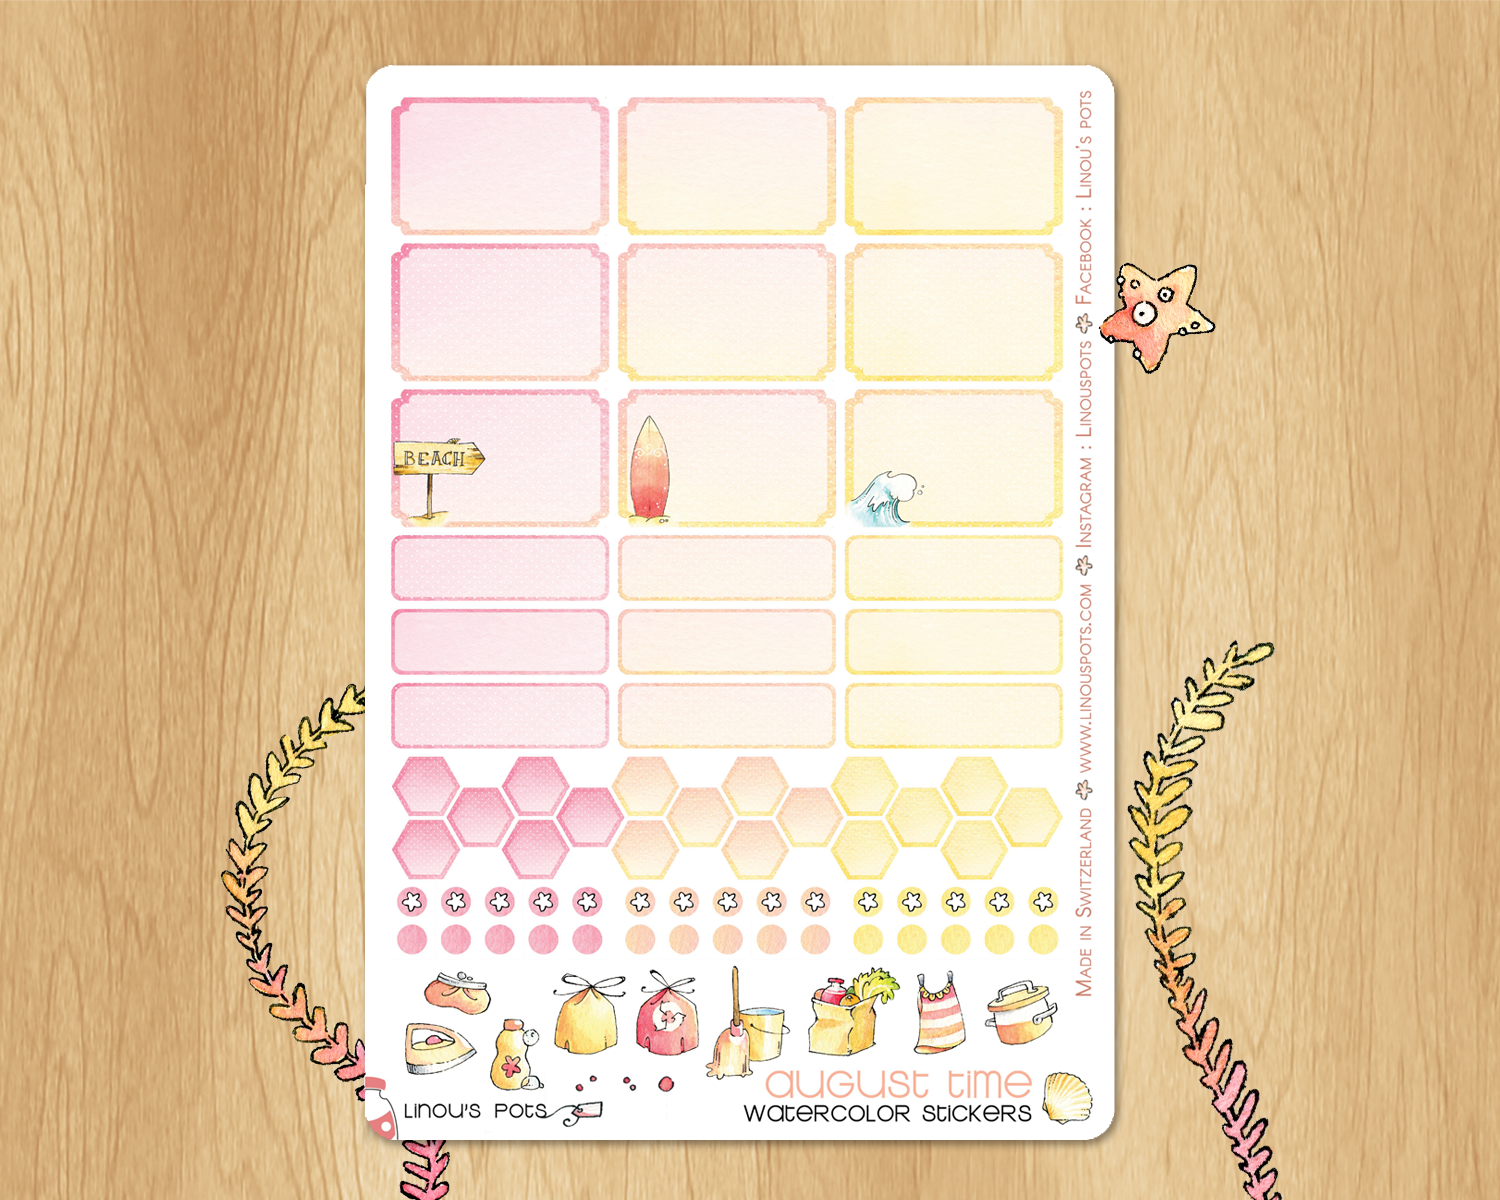 Half and quarter boxes stickers in summer moods for Erin Condren and Happy Planner 